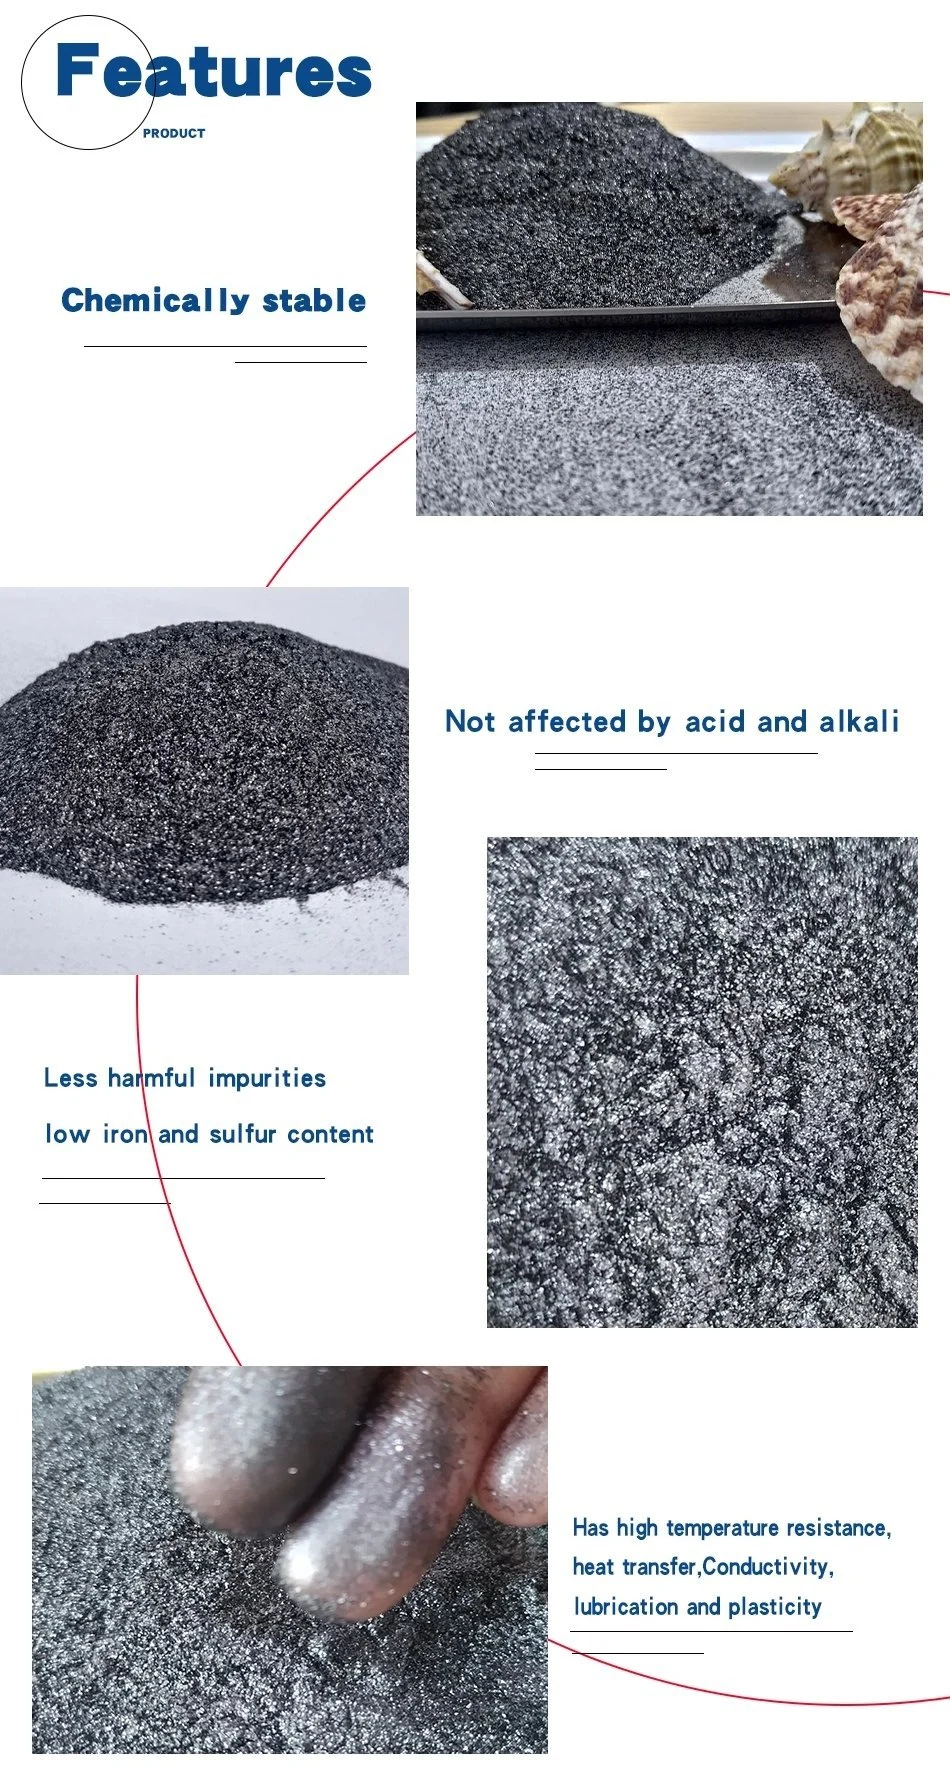 Fixed Carbon 94% Flake Graphite Powder for Electrical Carbon Produces-Graphite